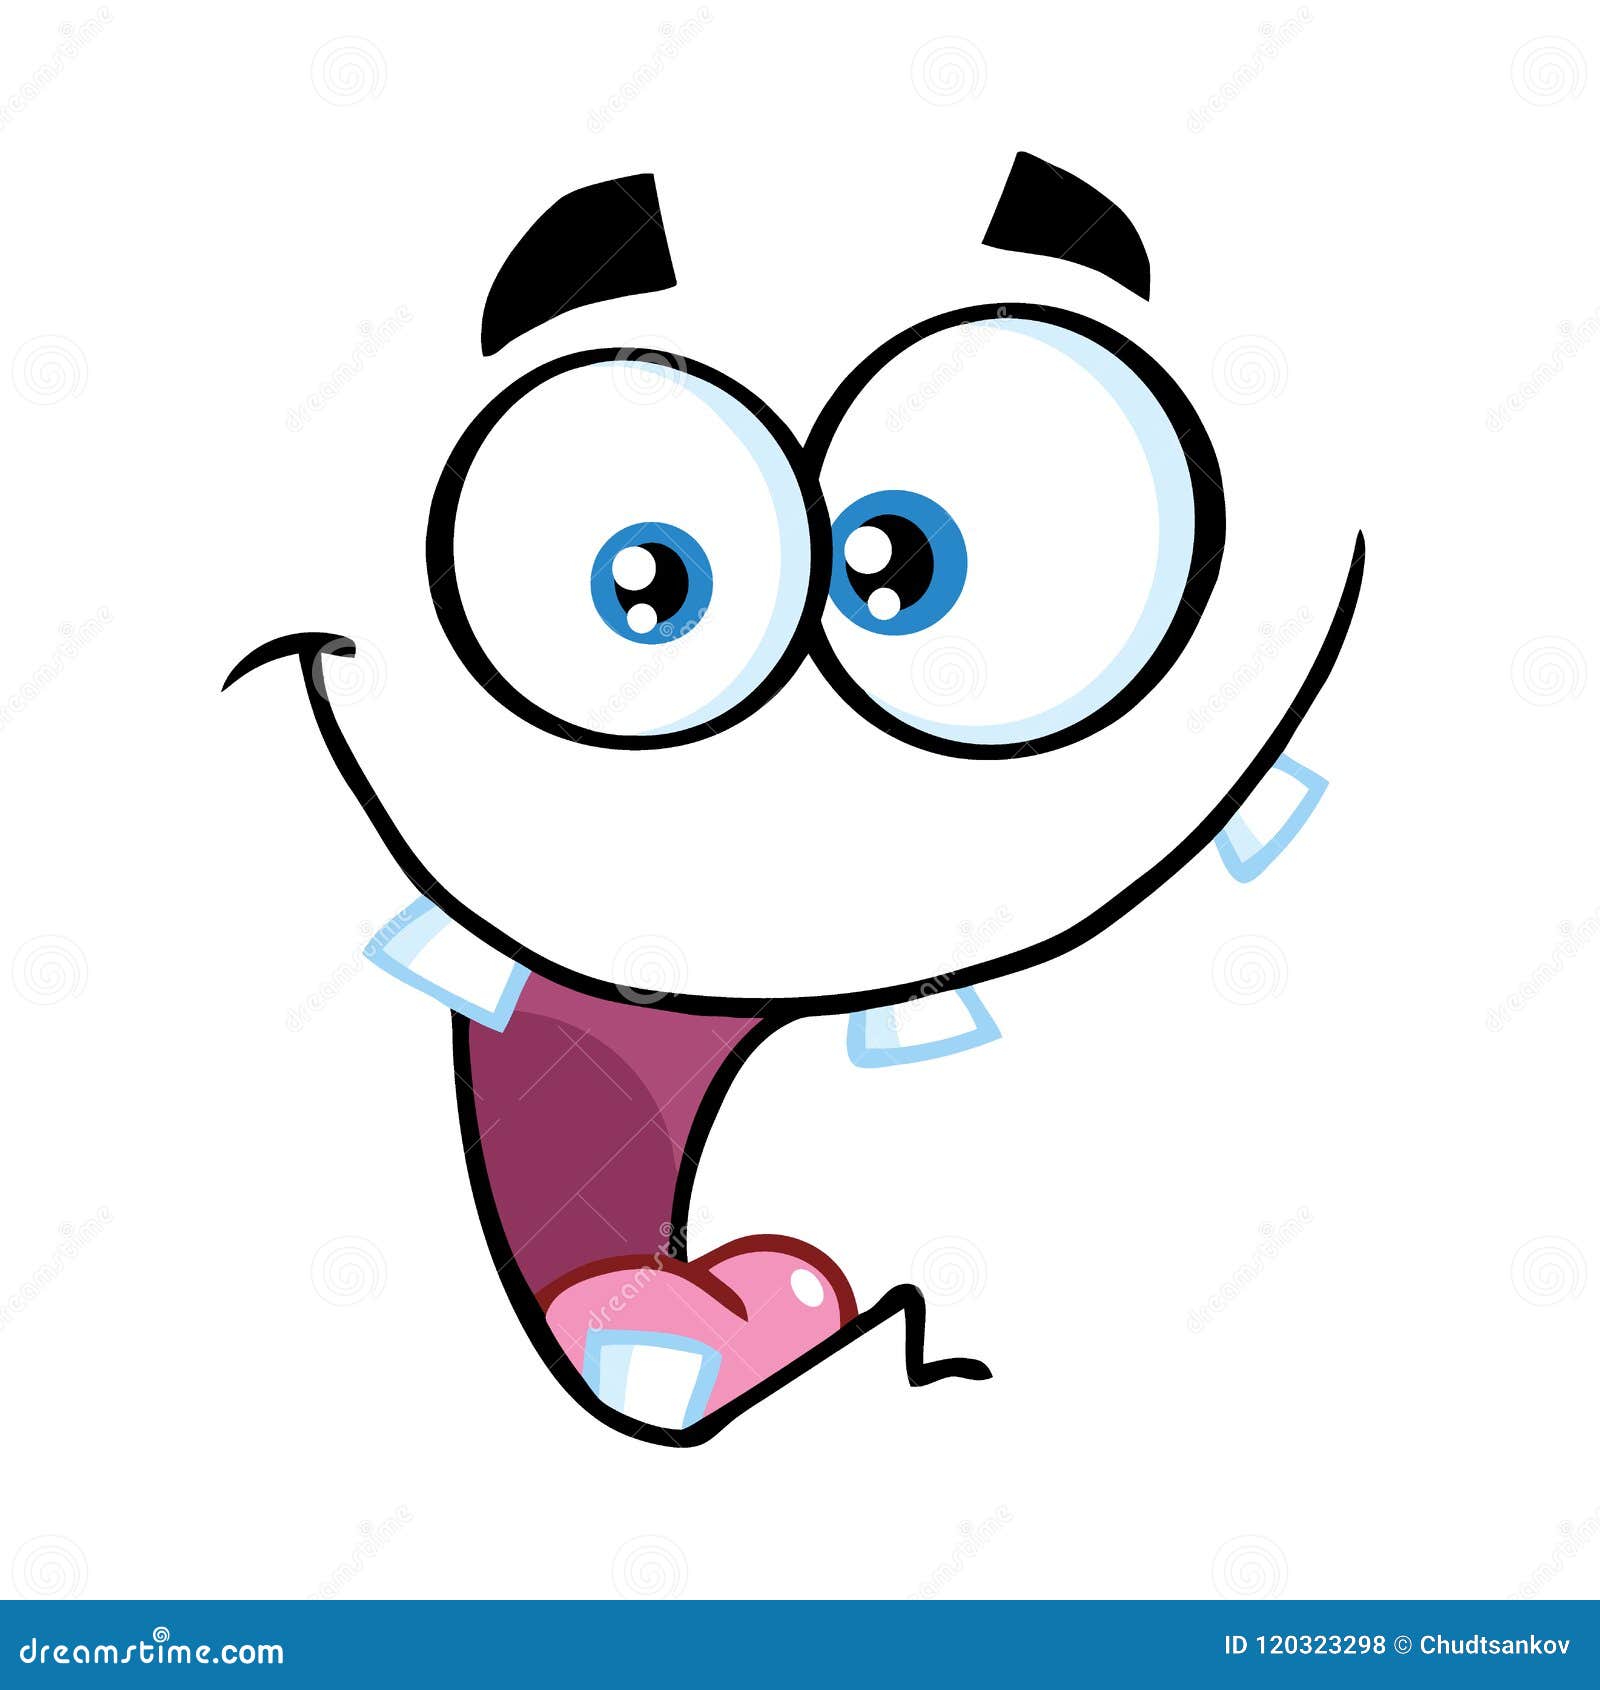 Crazy Cartoon Funny Face with Smiling Expression Stock Vector -  Illustration of emoji, eyes: 120323298